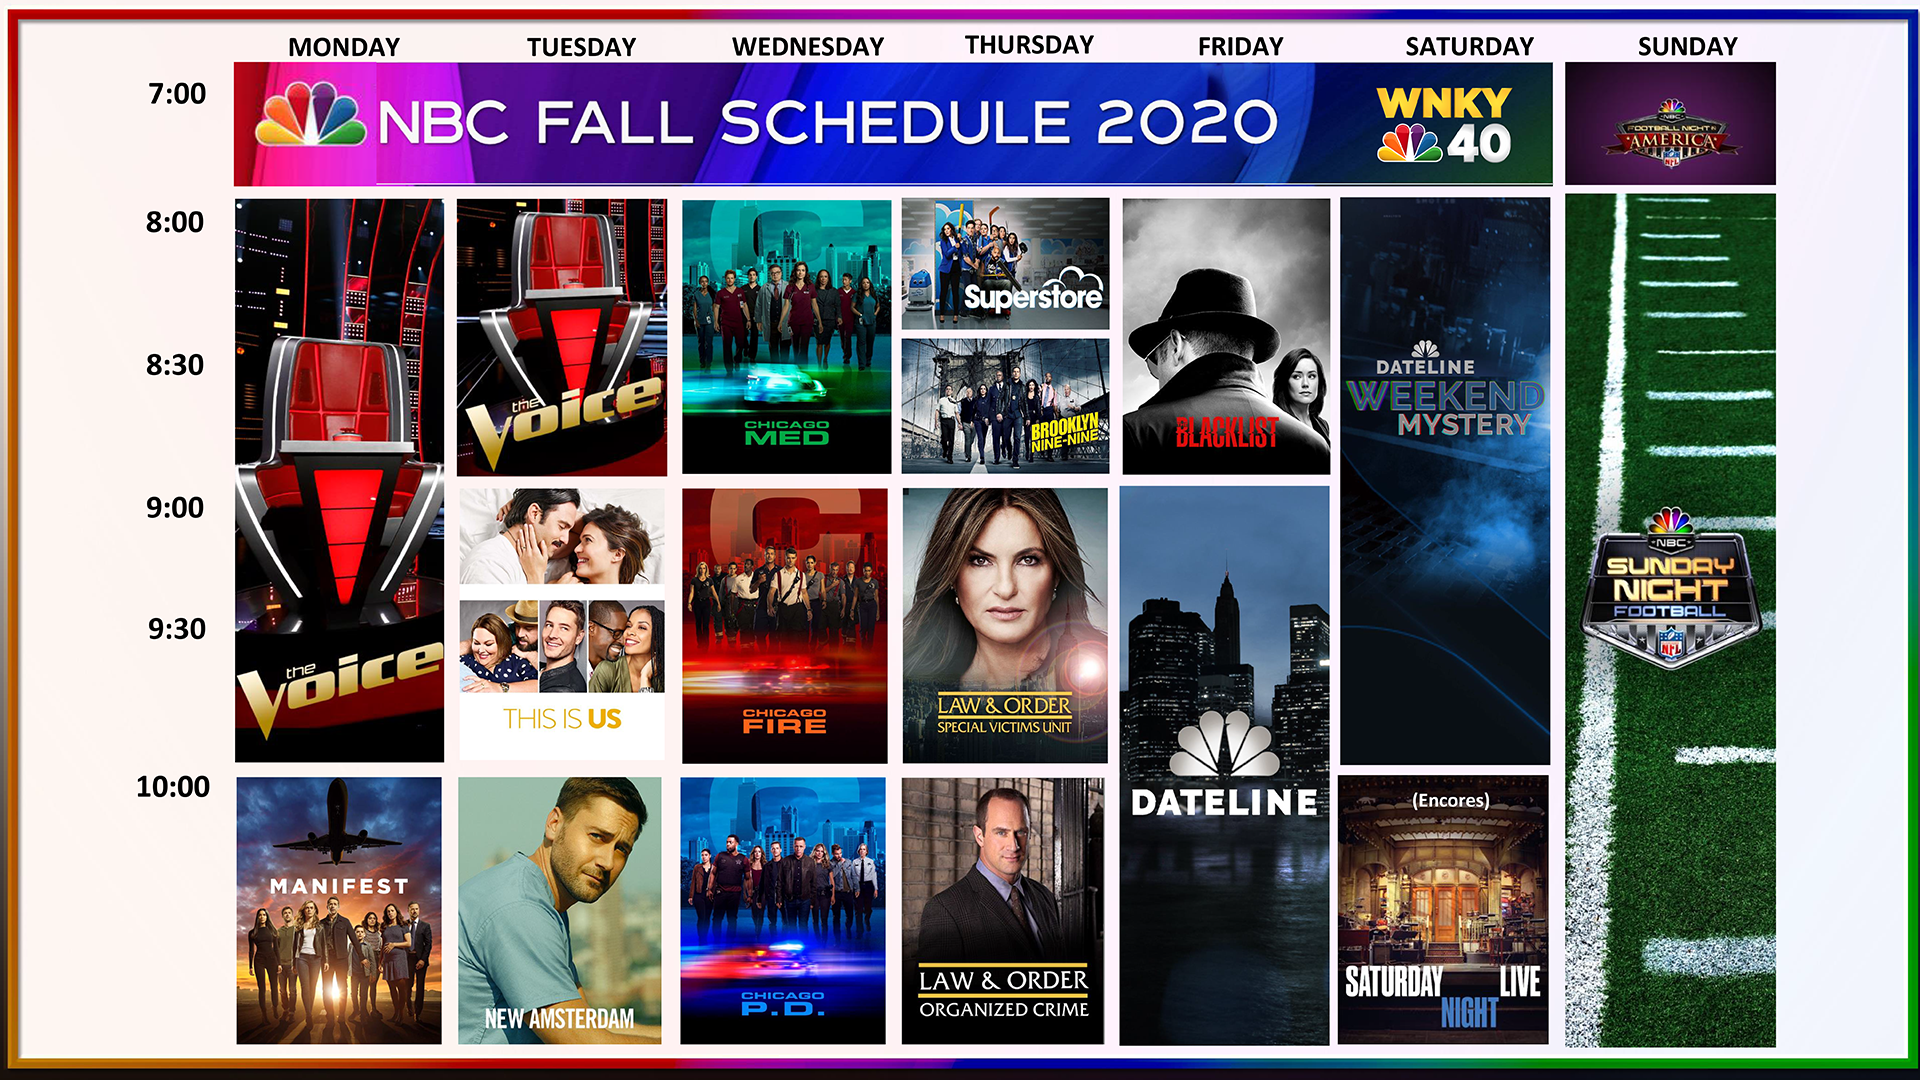 Nbc Fall Schedule 2022 Nbc Enters The 2020-21 Season With Unprecedented Stability Across Its  Schedule - News 40 | Wnky Television